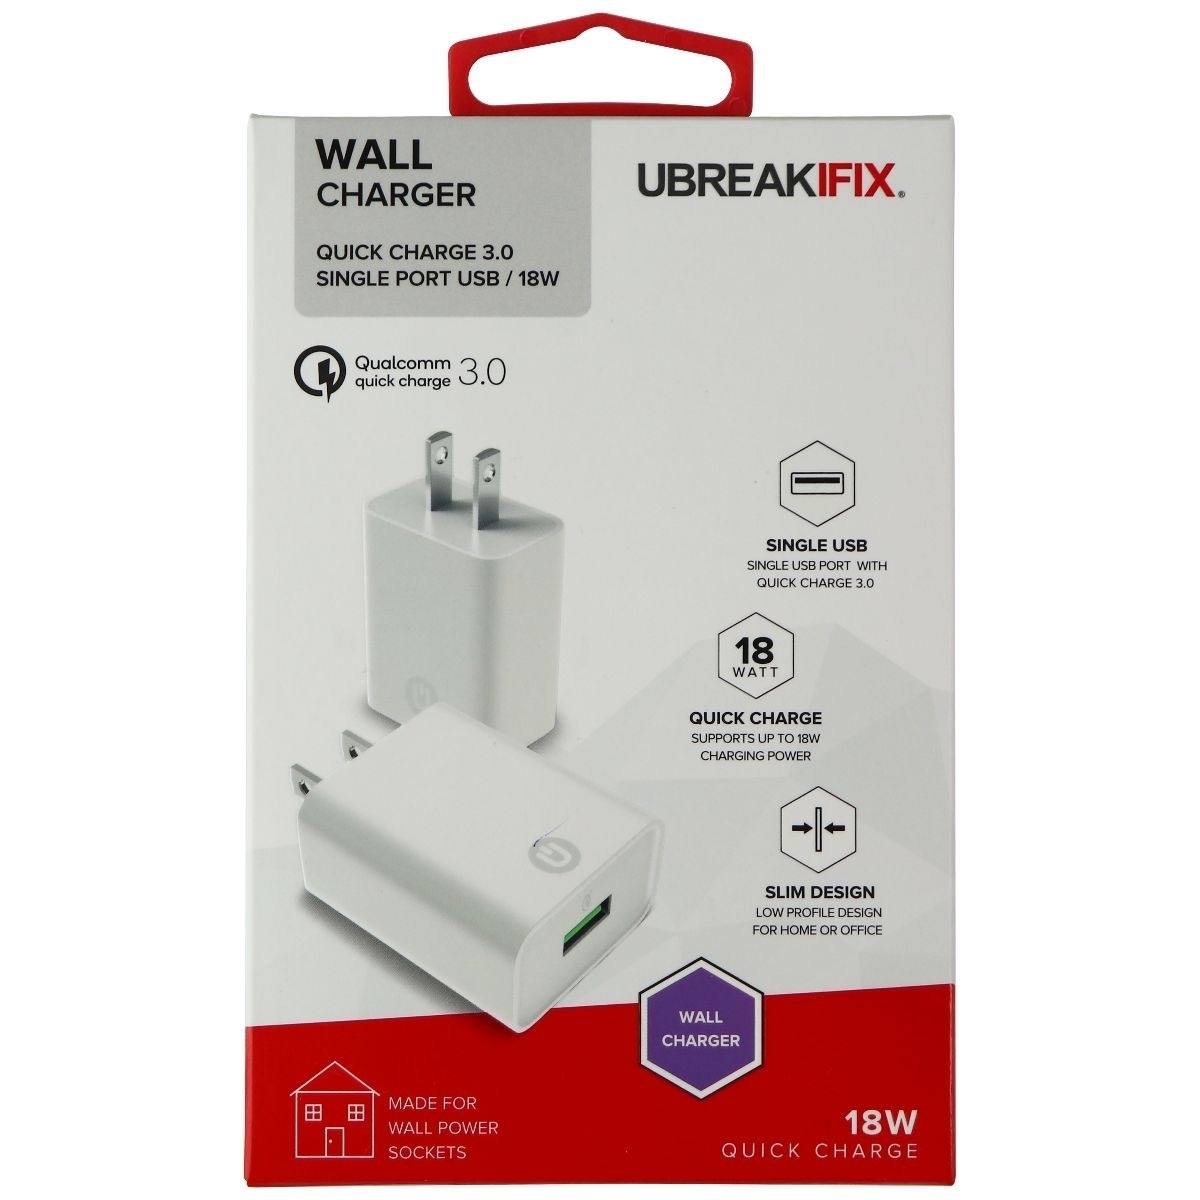 UBREAKIFIX 18W Quick Charge Wall Charger With 3.0 Single Port USB - White